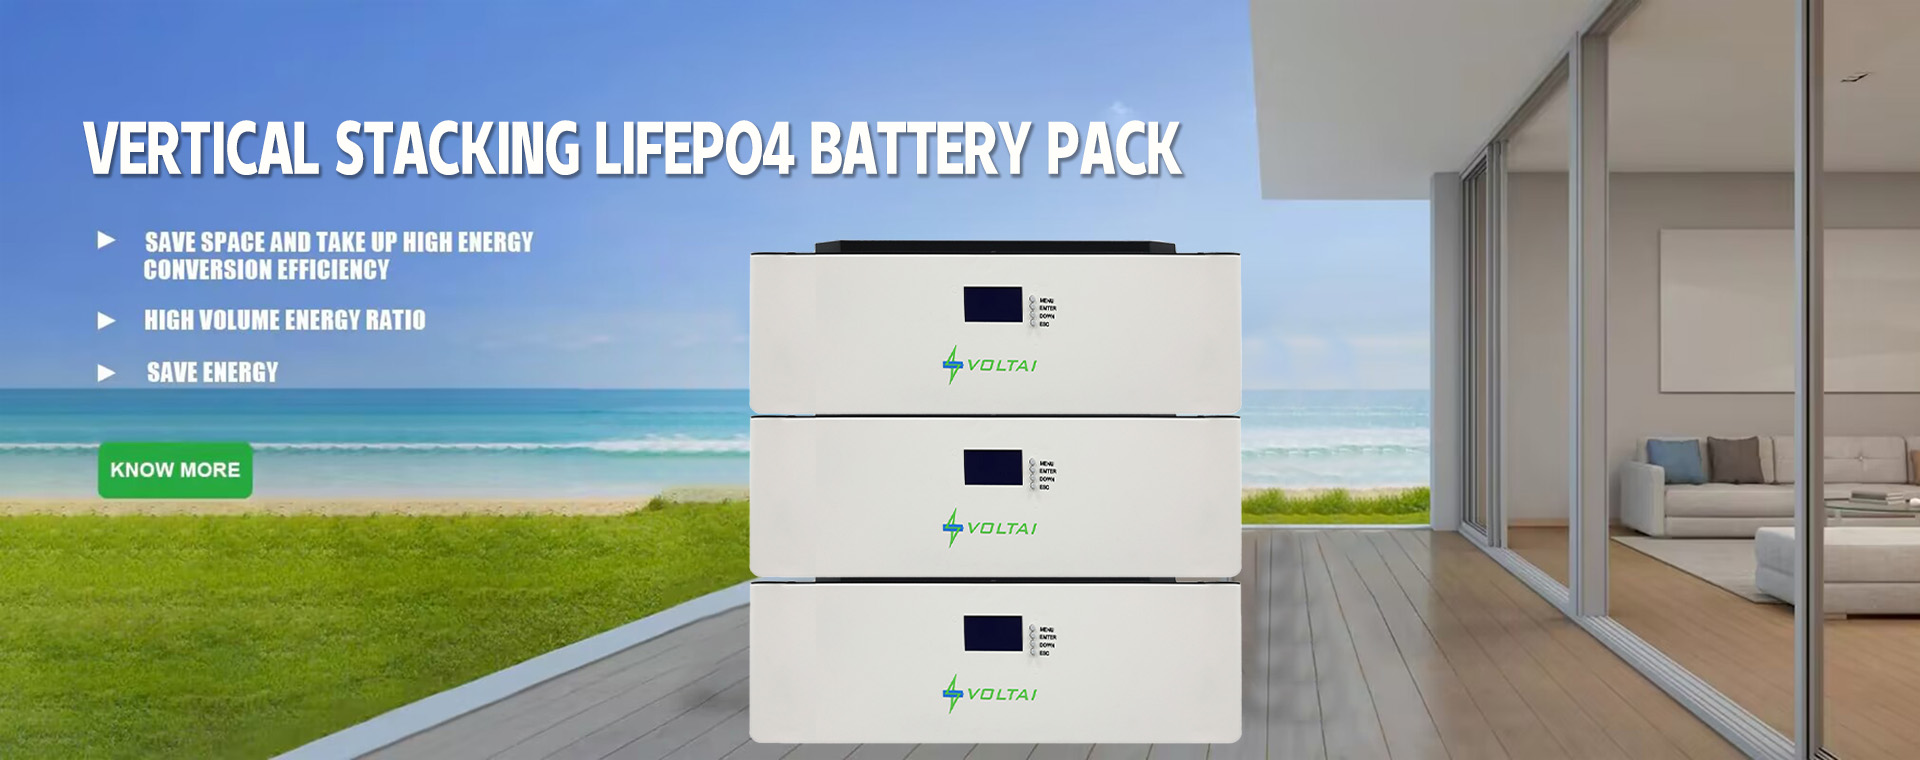 Vertical Stacking Battery